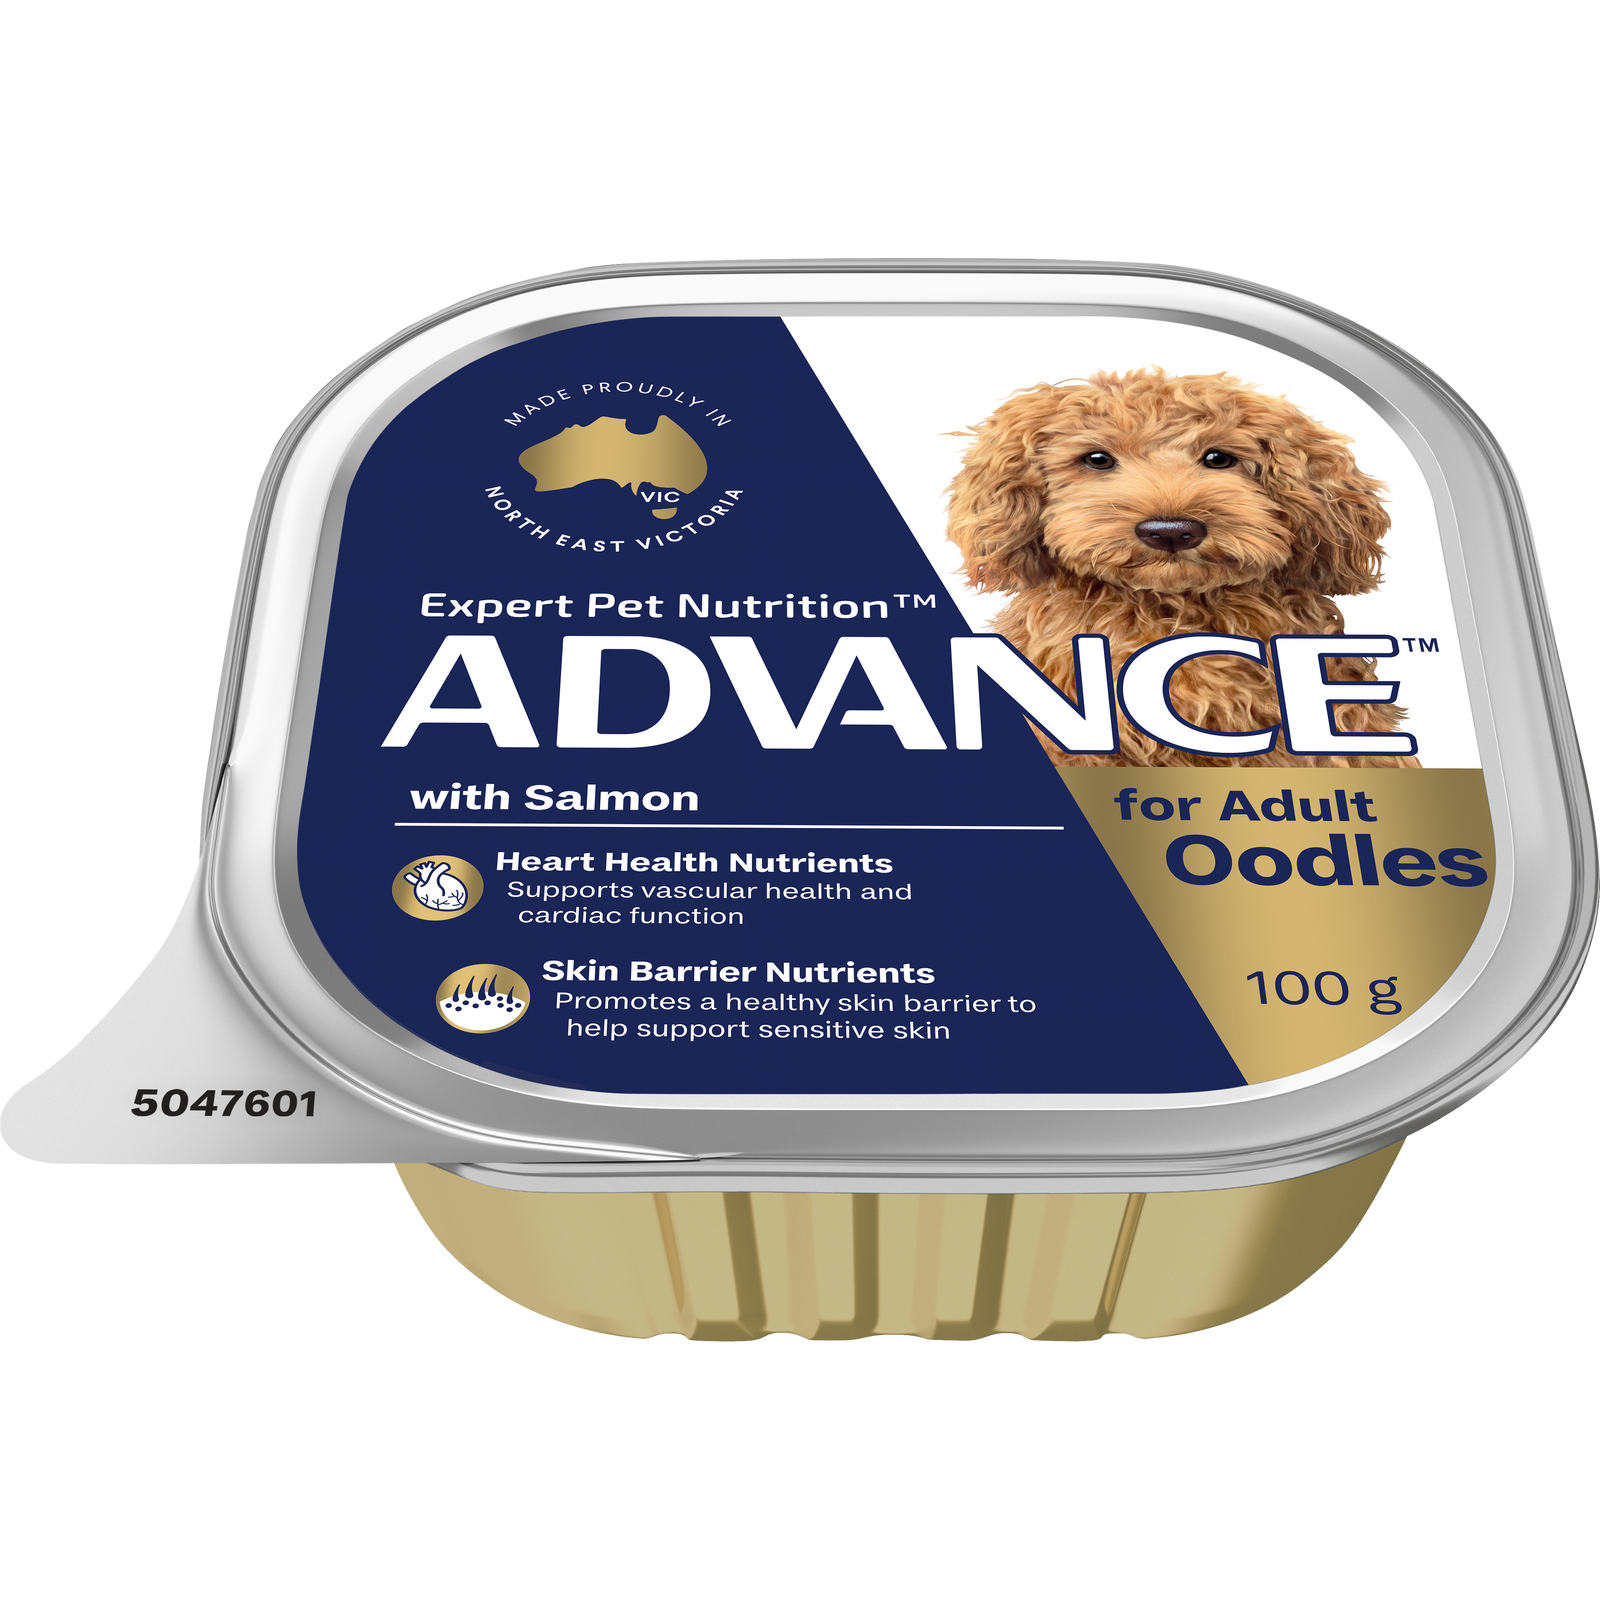 ADVANCE™ Oodles Adult with Salmon Trays